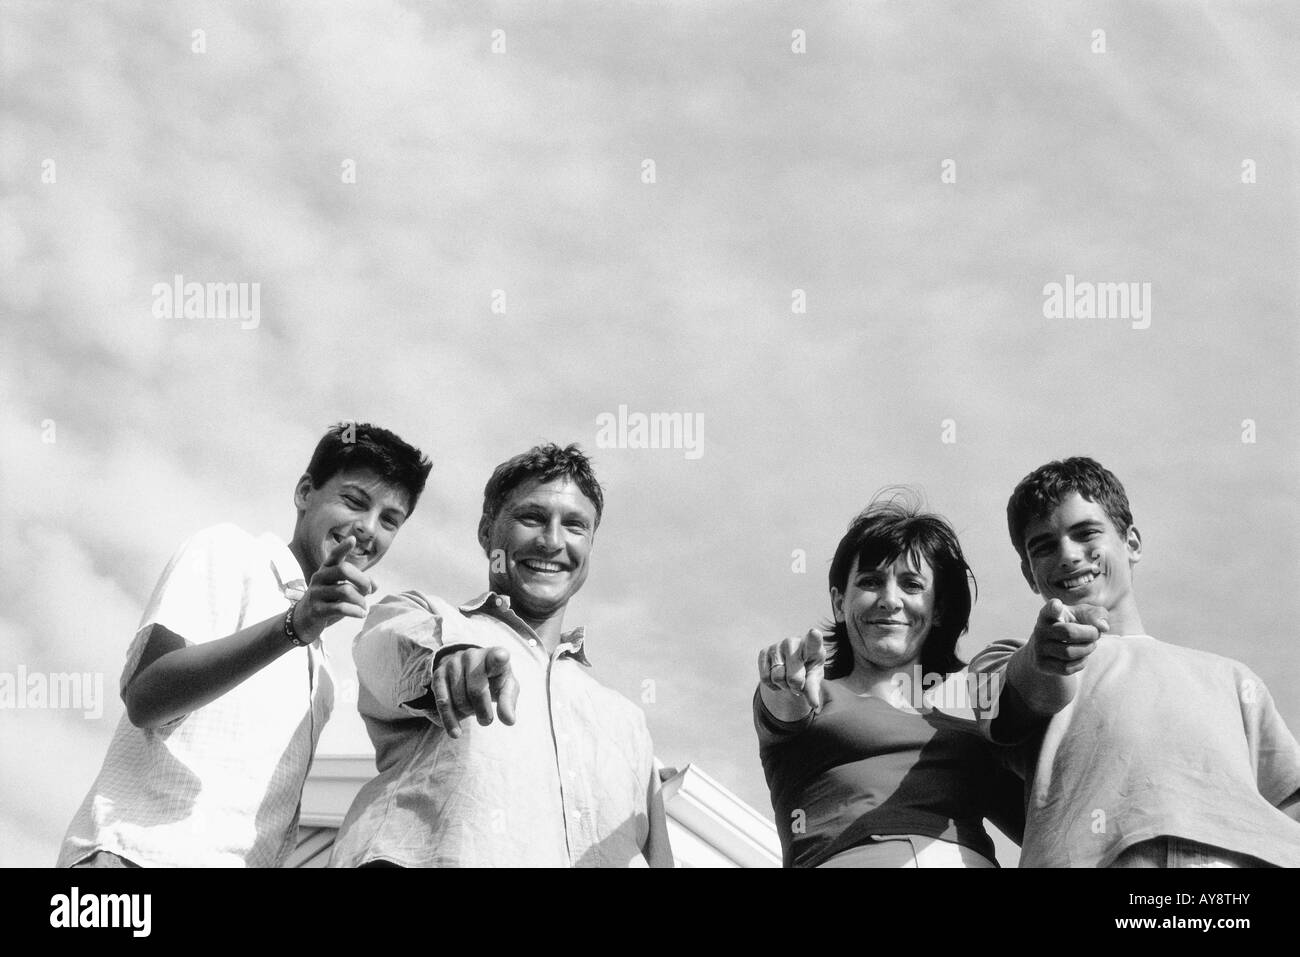 Family standing together outdoors, pointing and smiling at camera, low angle view Stock Photo